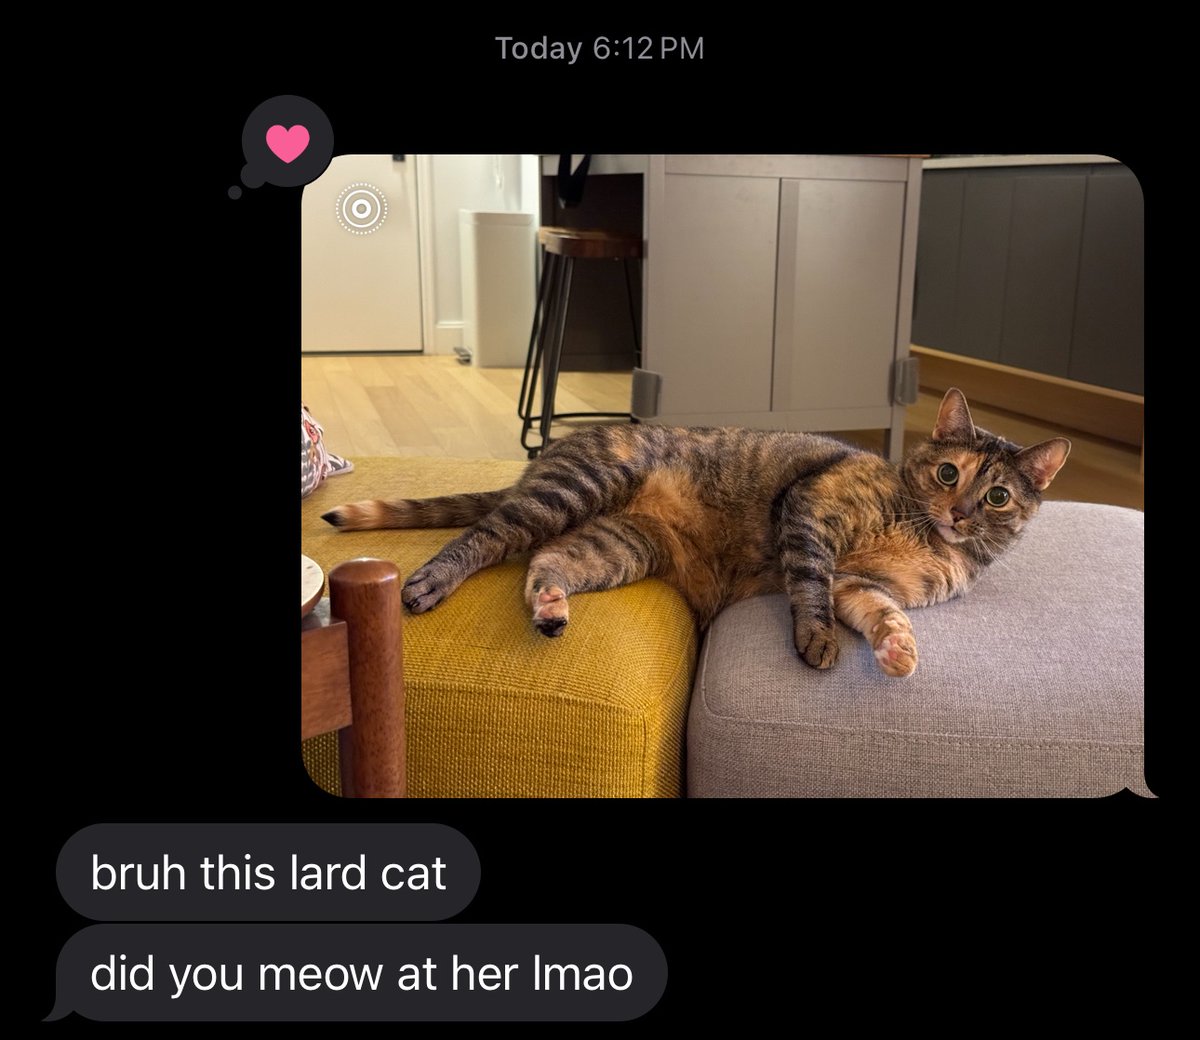 sent my brother a photo of our cat and forgot that Live Photos have audio